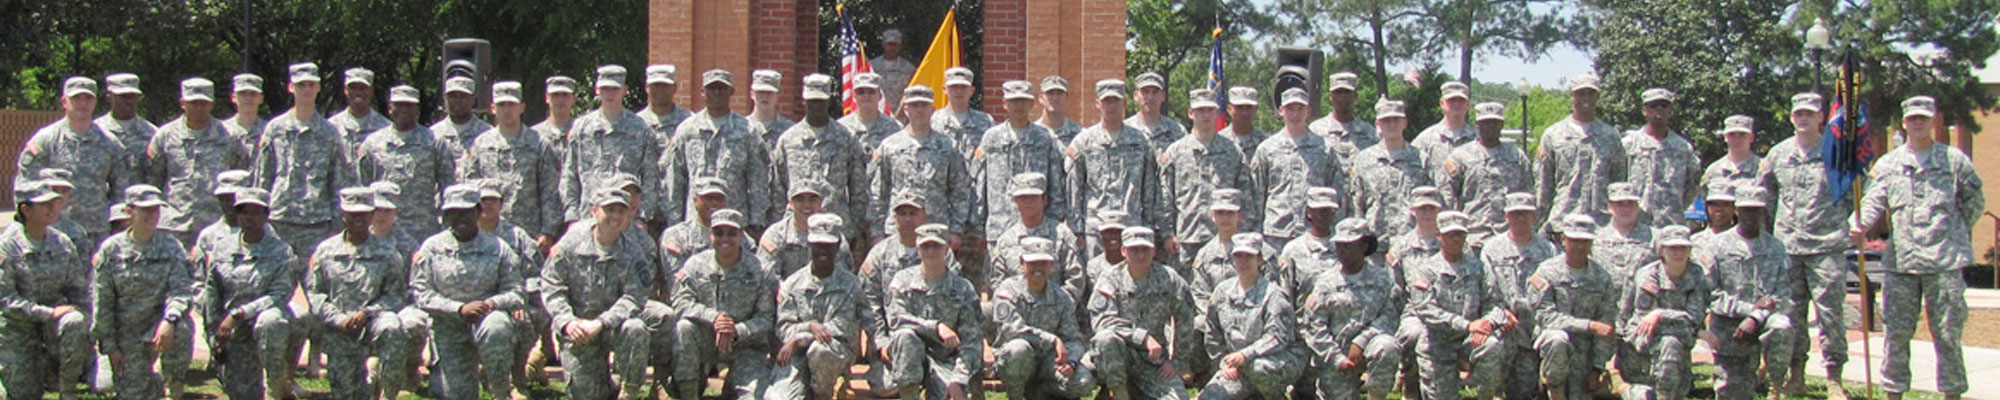 Army Rotc Reserve Officers Training Corps Allows Students To